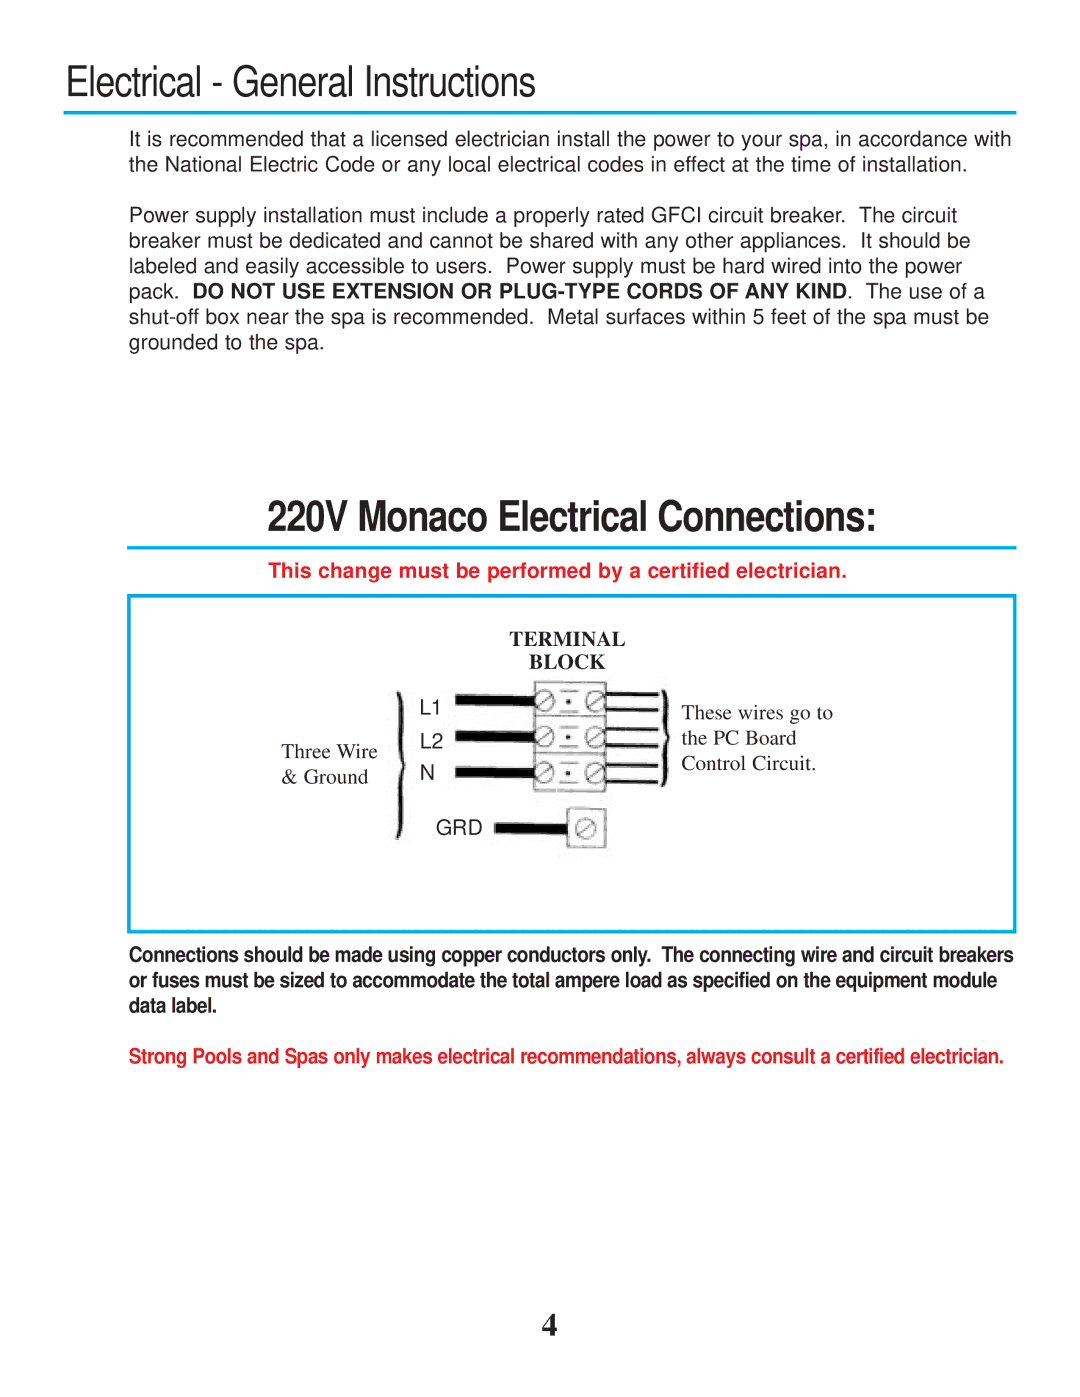 Strong Pools and Spas owner manual Electrical General Instructions, 220V Monaco Electrical Connections 